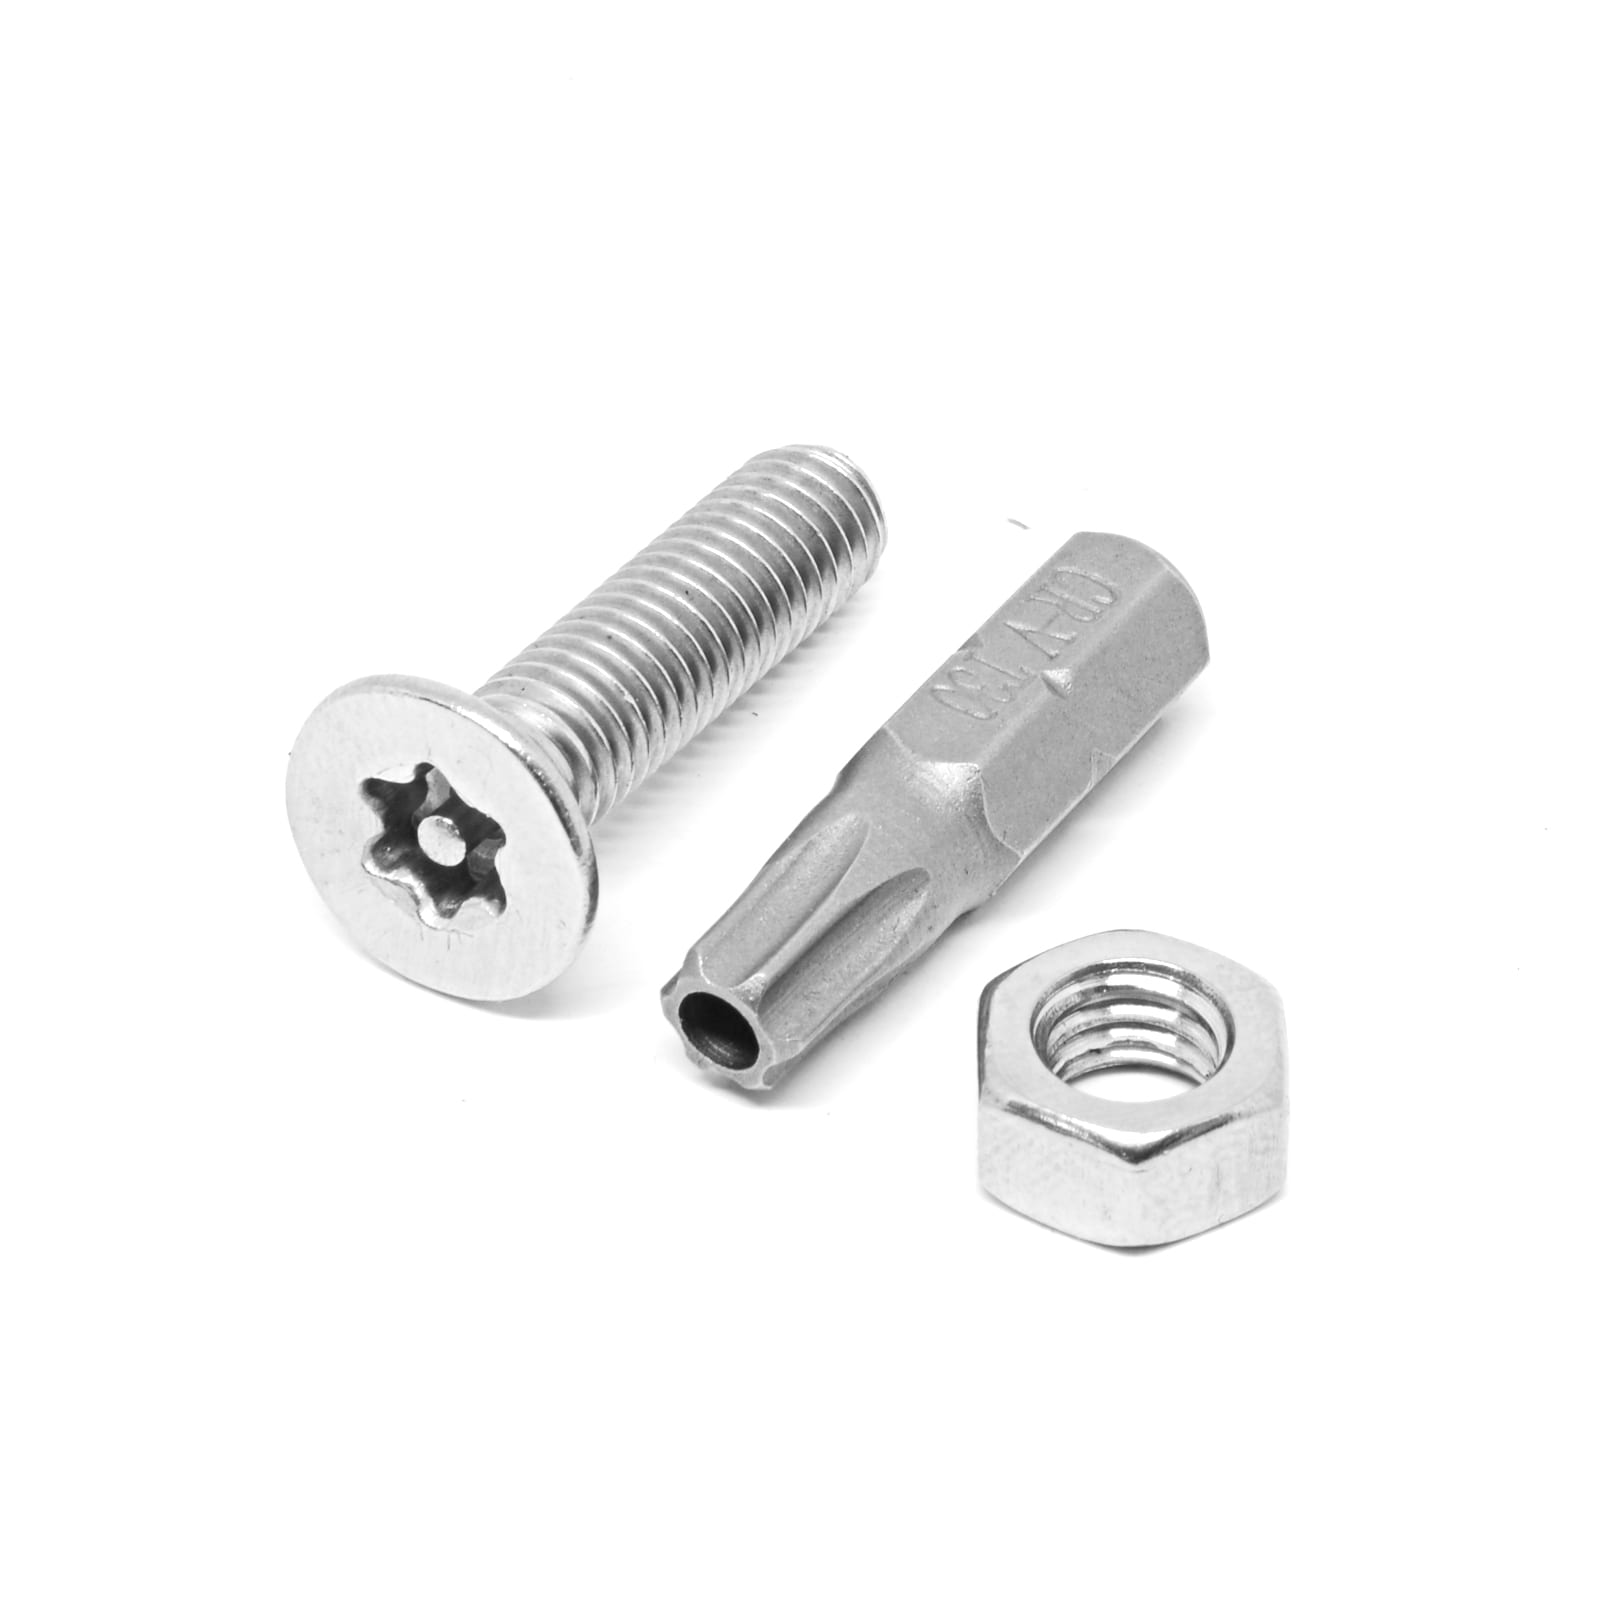 SECURITY BOLT M6 - 1 x 35 STAINLESS STEEL FLAT HEAD